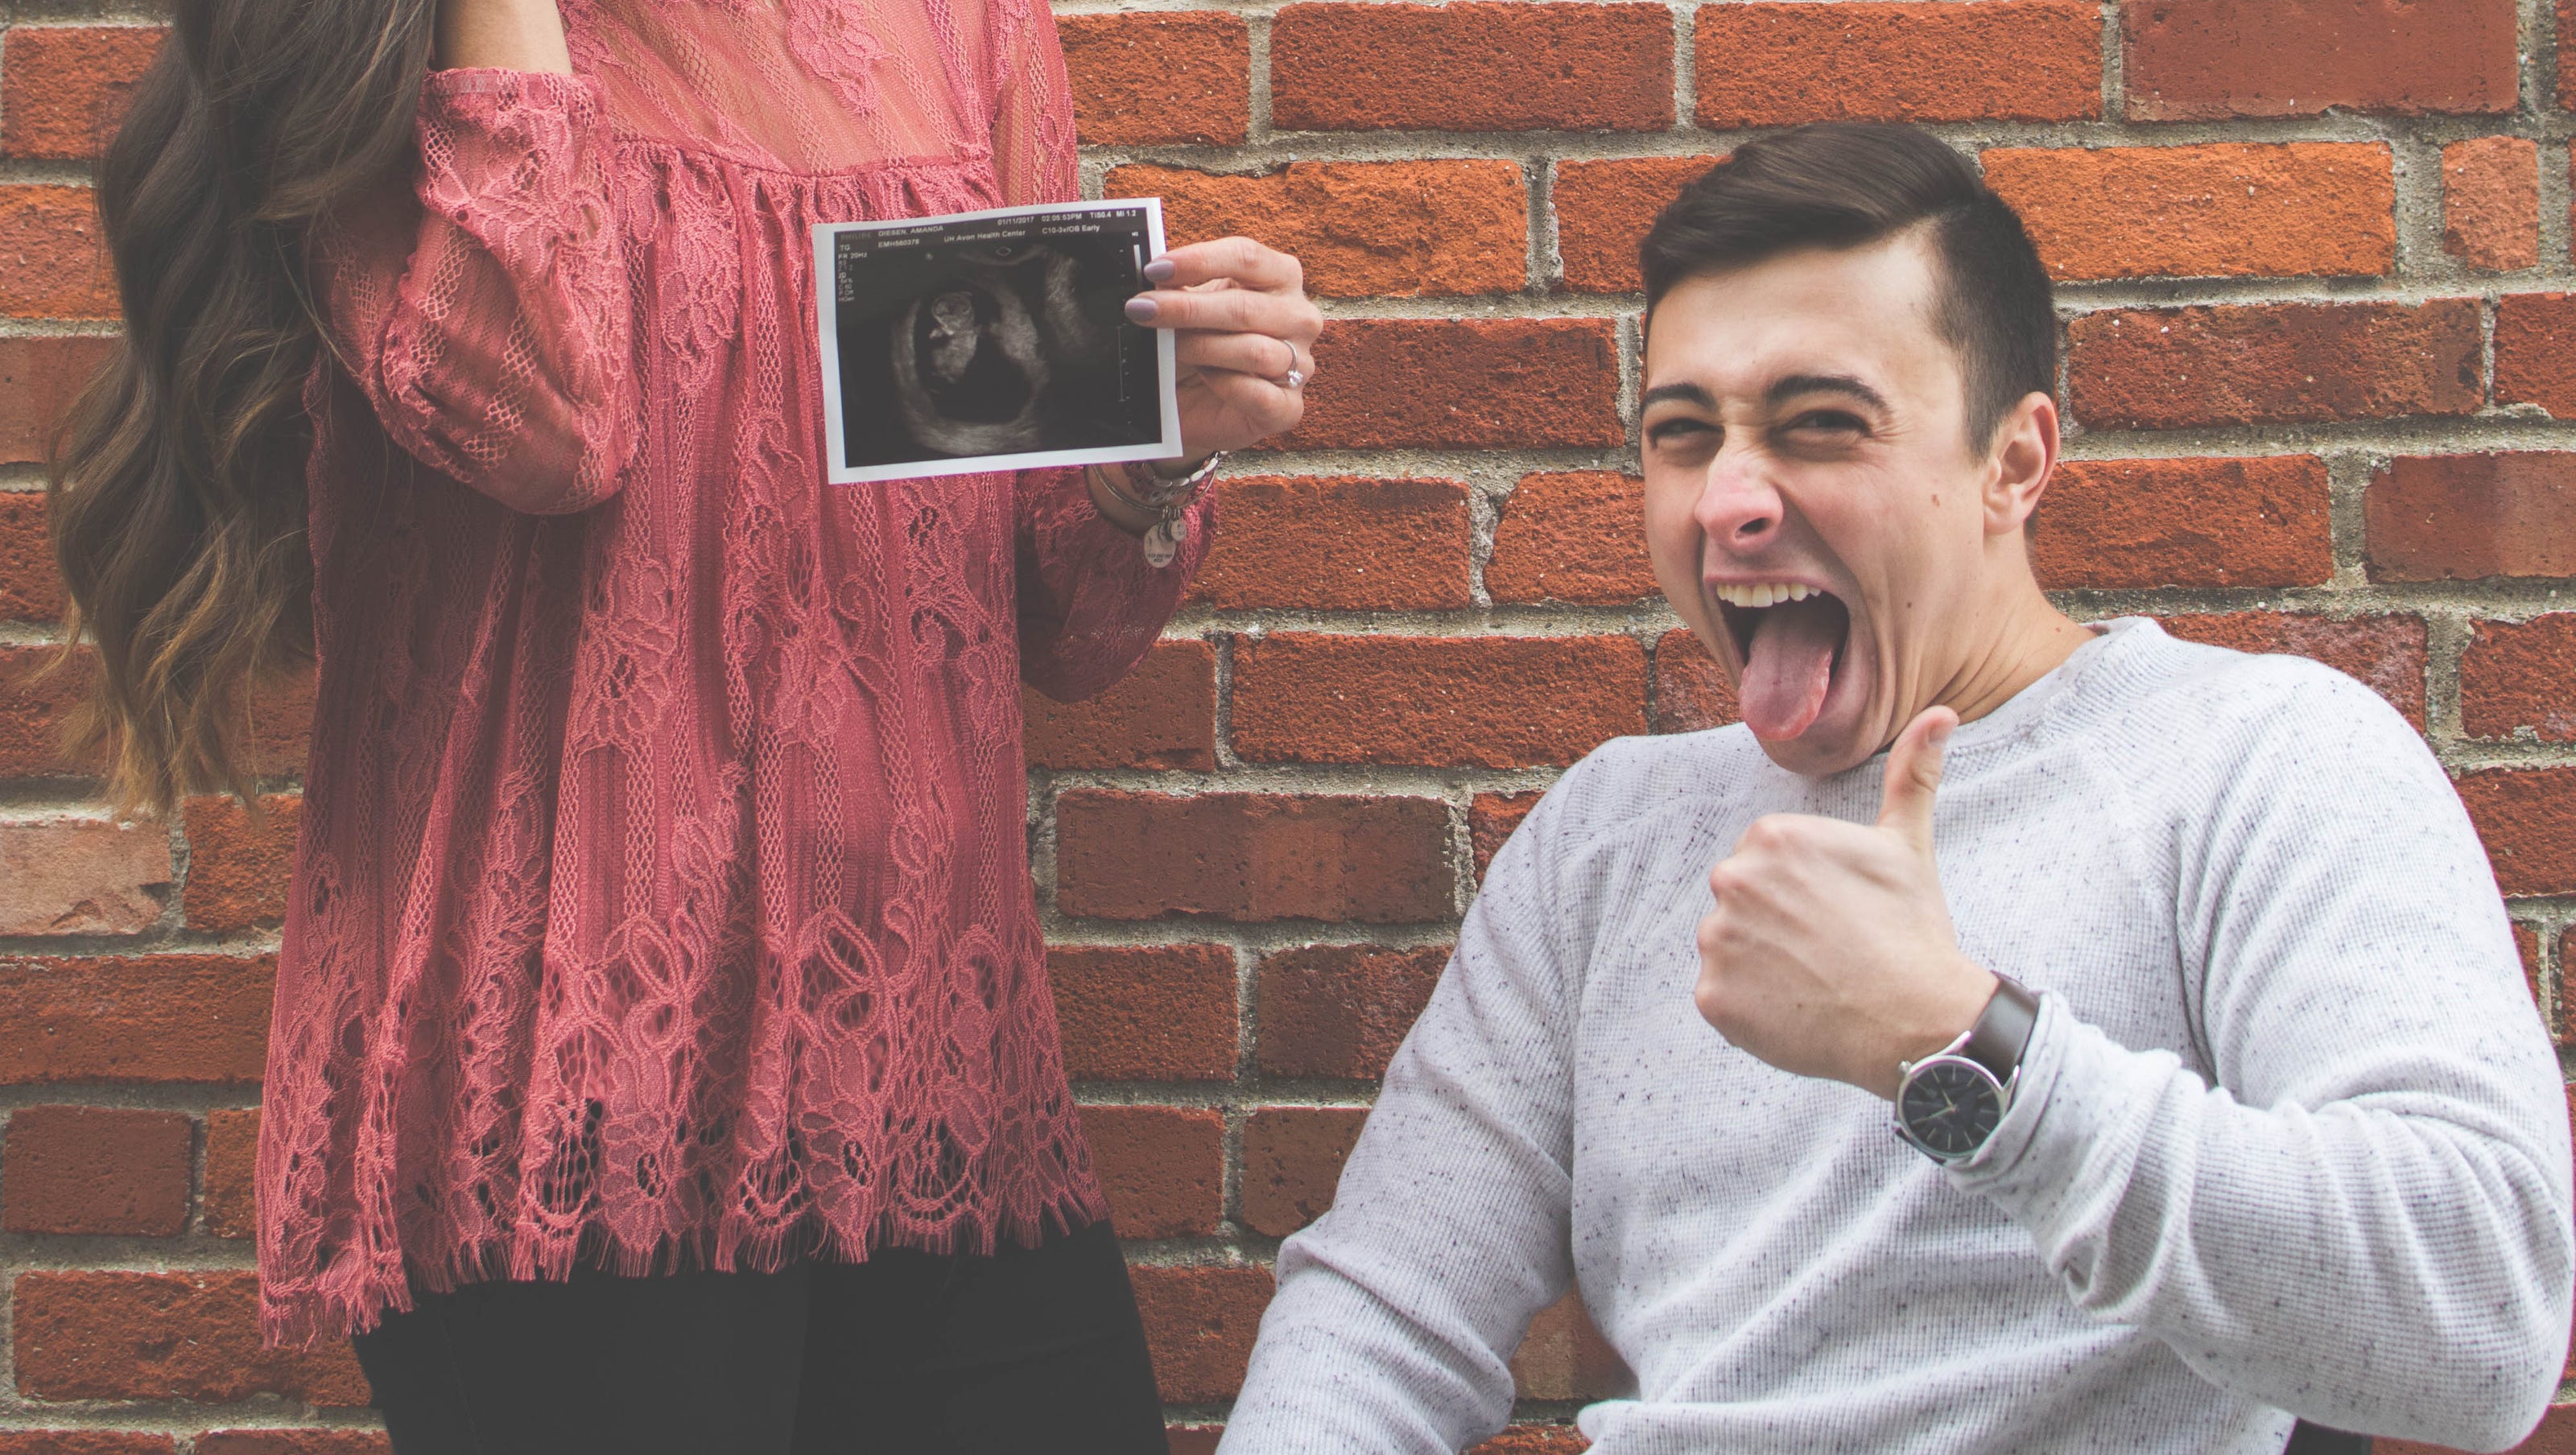 Ohio couple announces pregnancy with the funniest photo